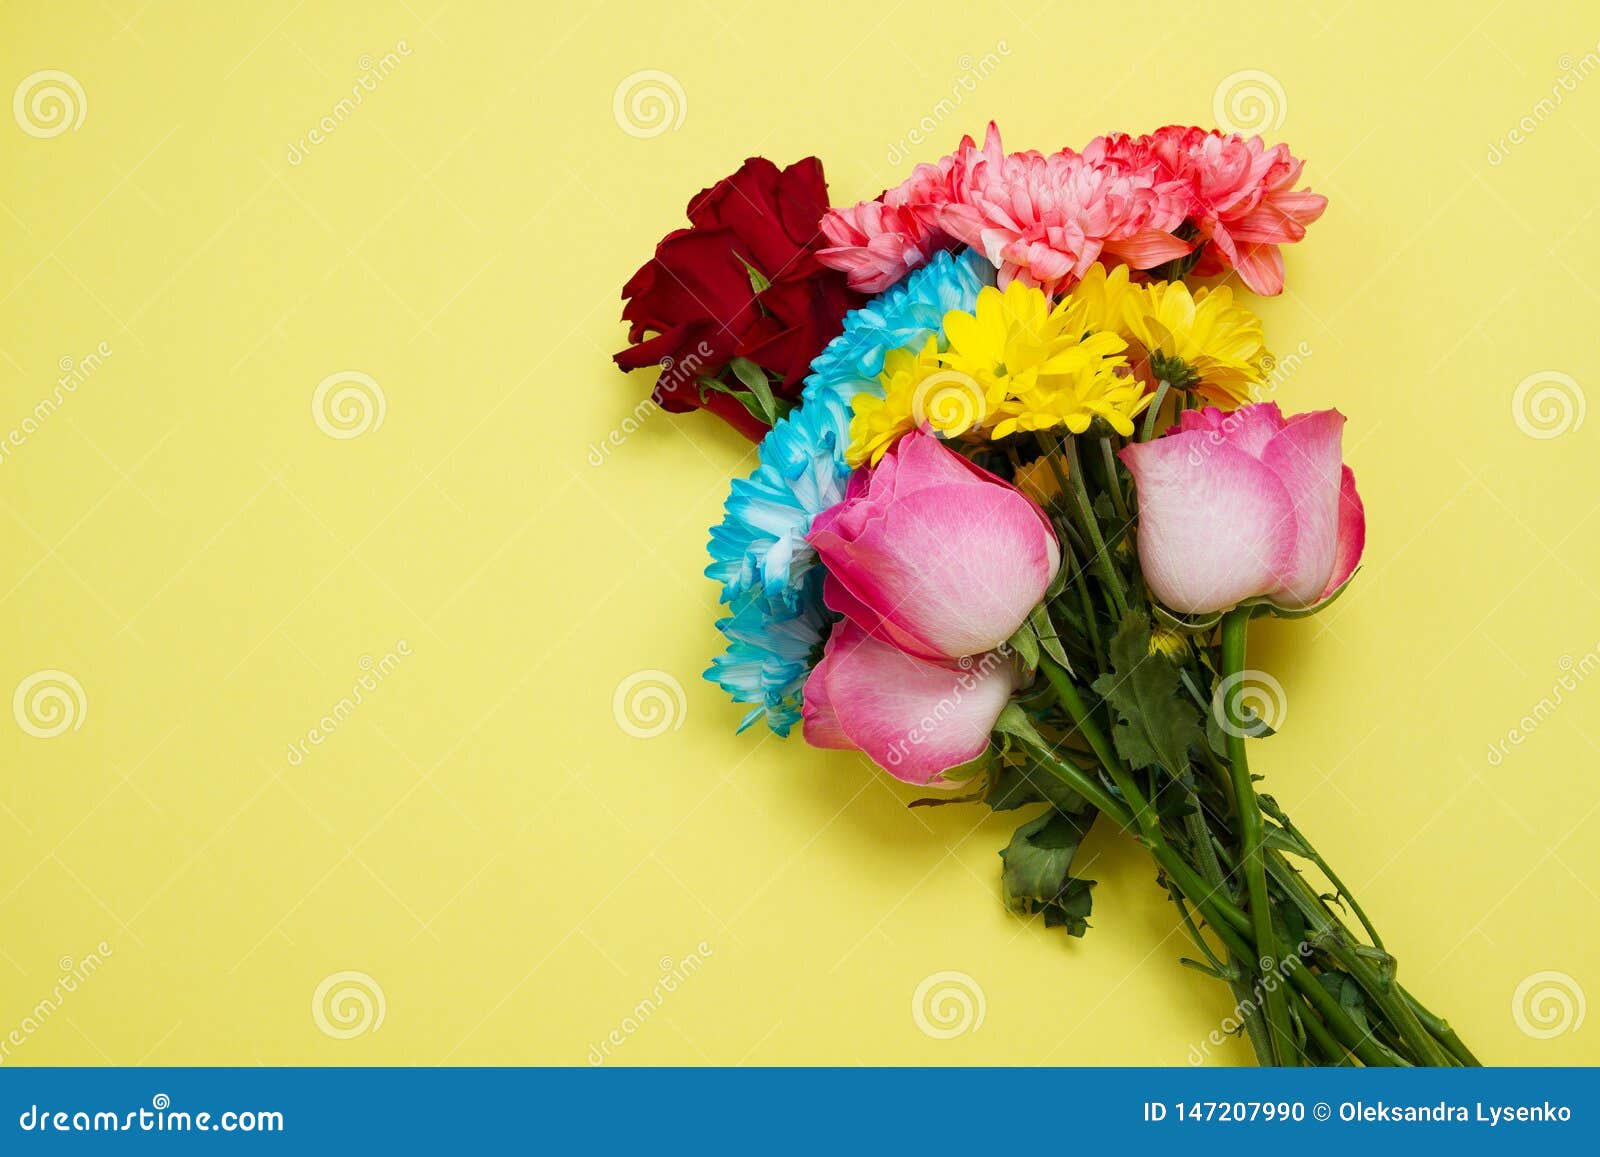 Send Flowers Online Concept Flower Delivery For Valentine And Mother Day Bouquet Of Red Pink Roses Isolated On Yellow Background Stock Photo Image Of Delivery Love 147207990